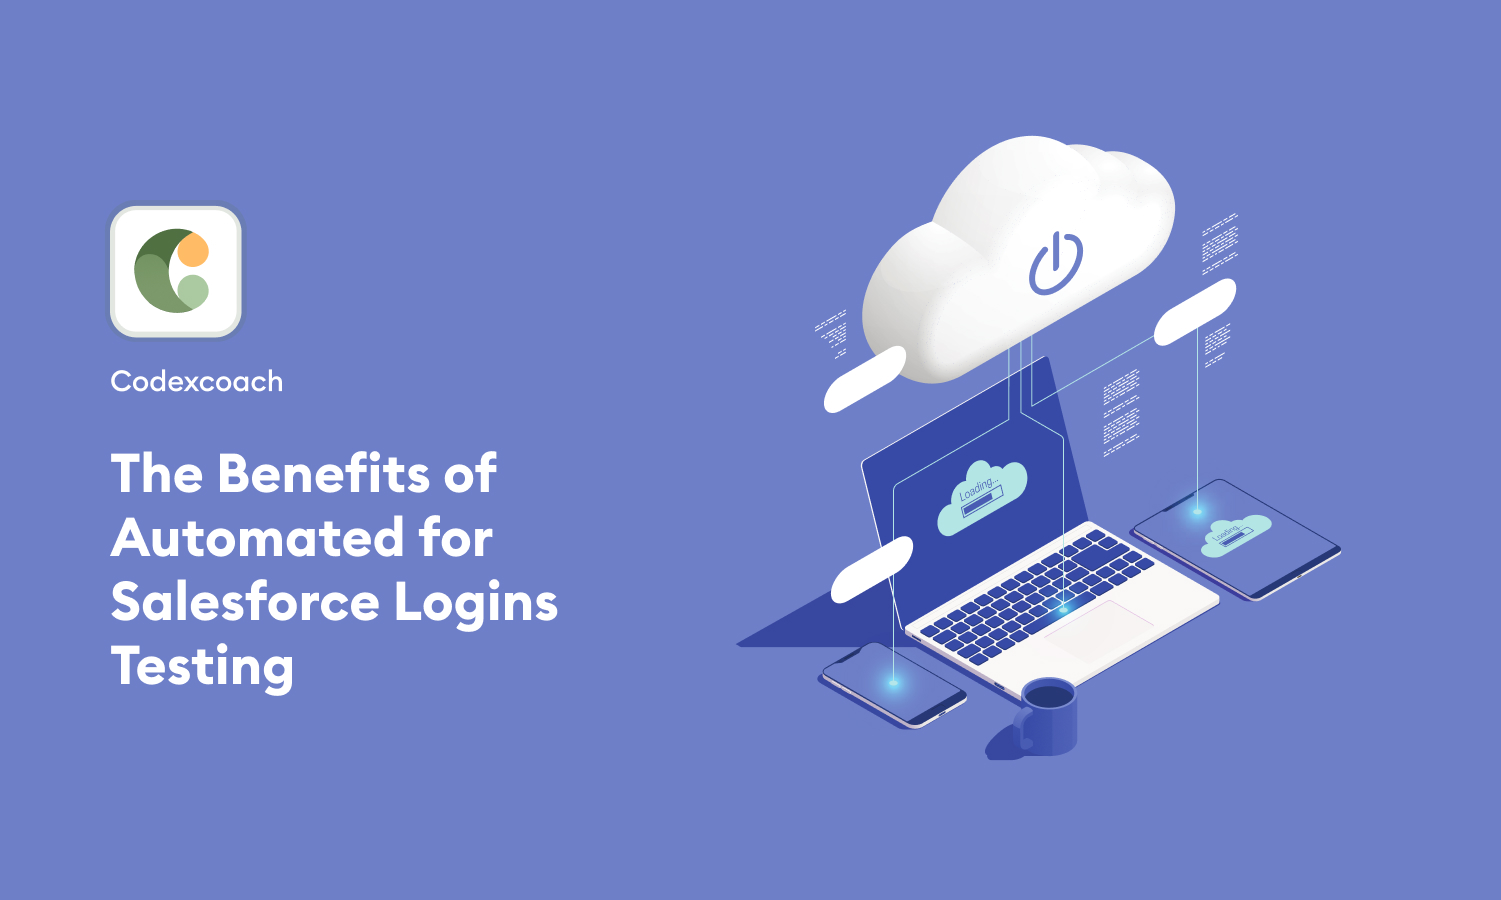 The Benefits of Automated for Salesforce Logins Testing